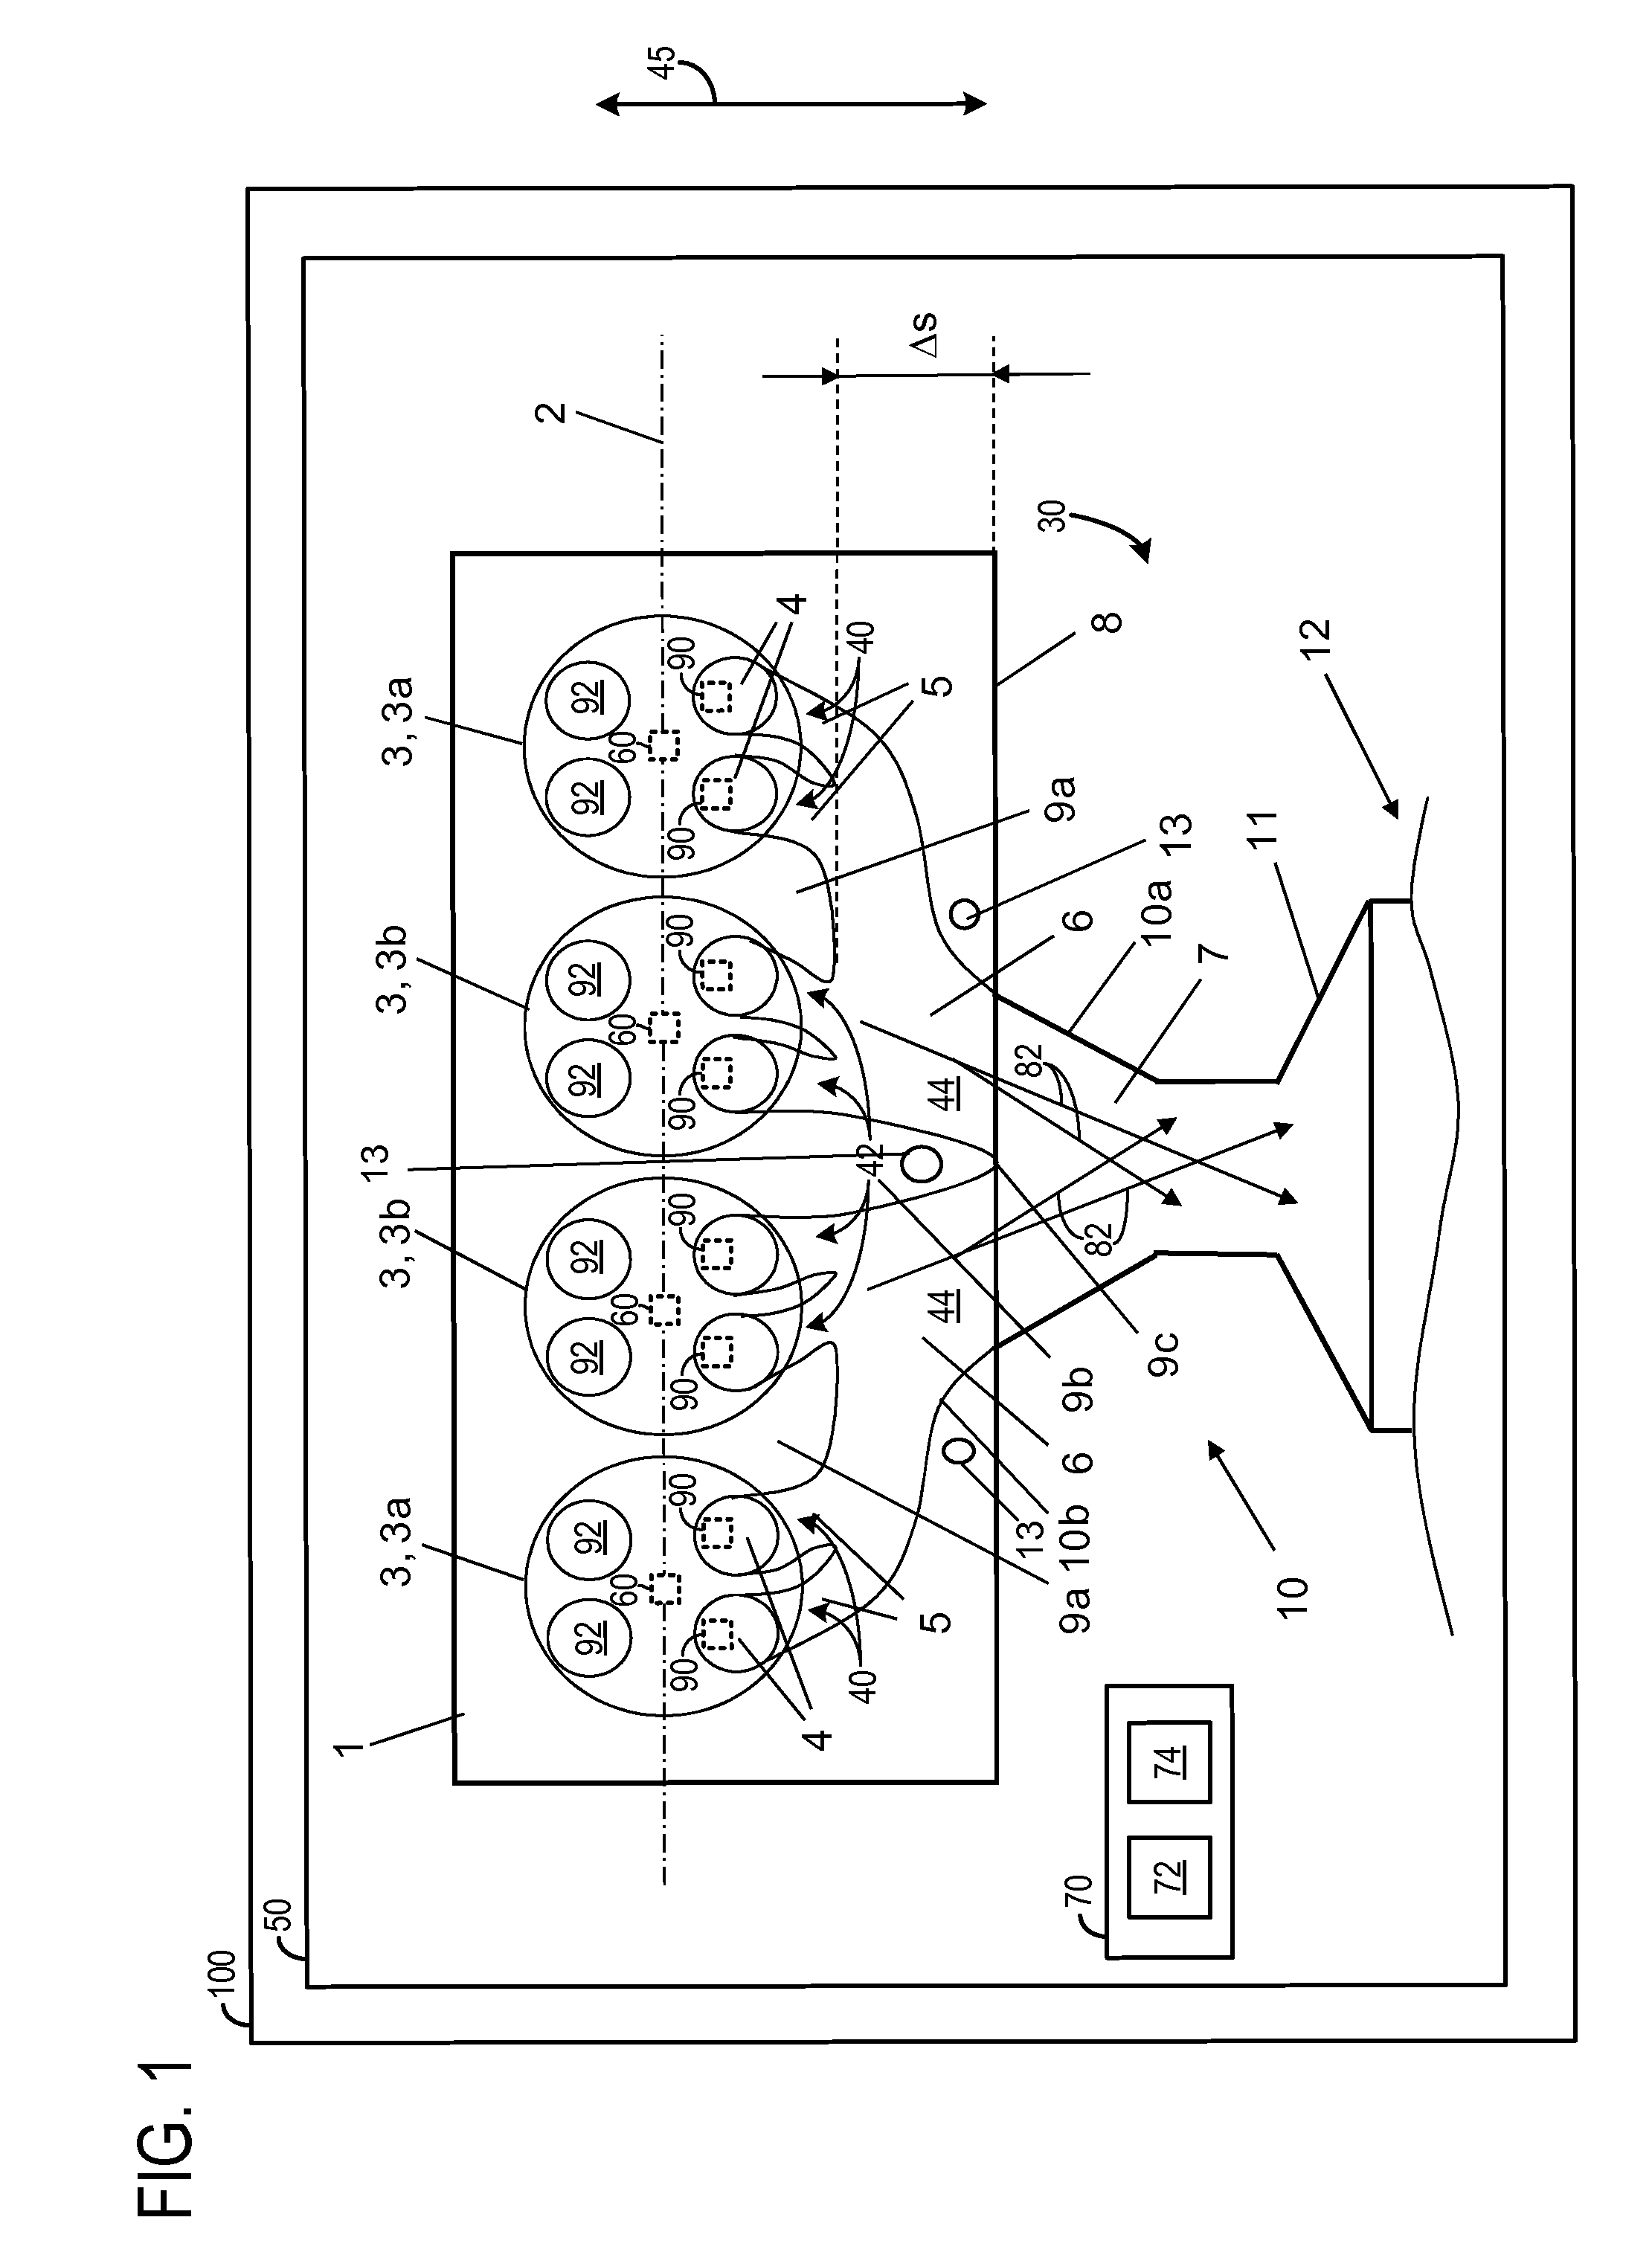 Liquid-cooled internal combustion engine with a partially integrated exhaust manifold